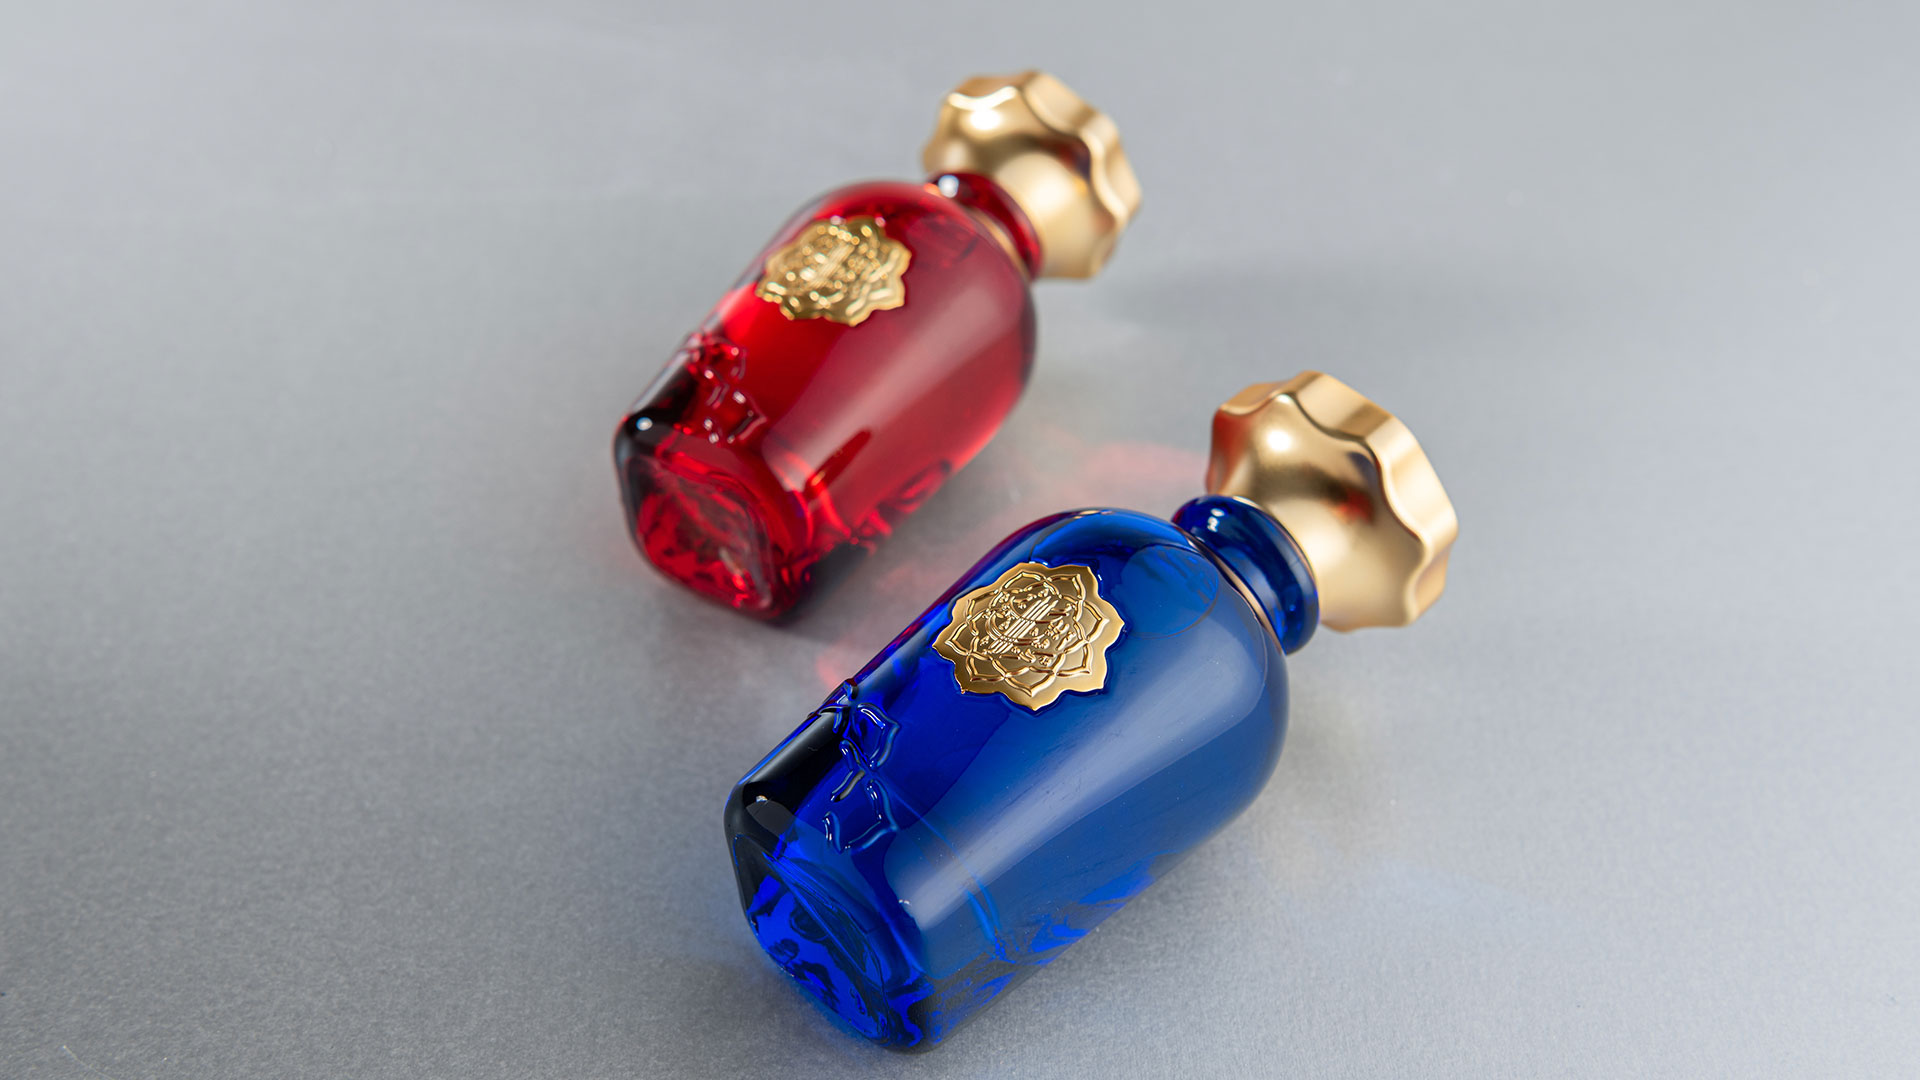 Savor Exquisite Aromas: High-Quality Delightful-Smelling Perfumes at Affordable Prices ​